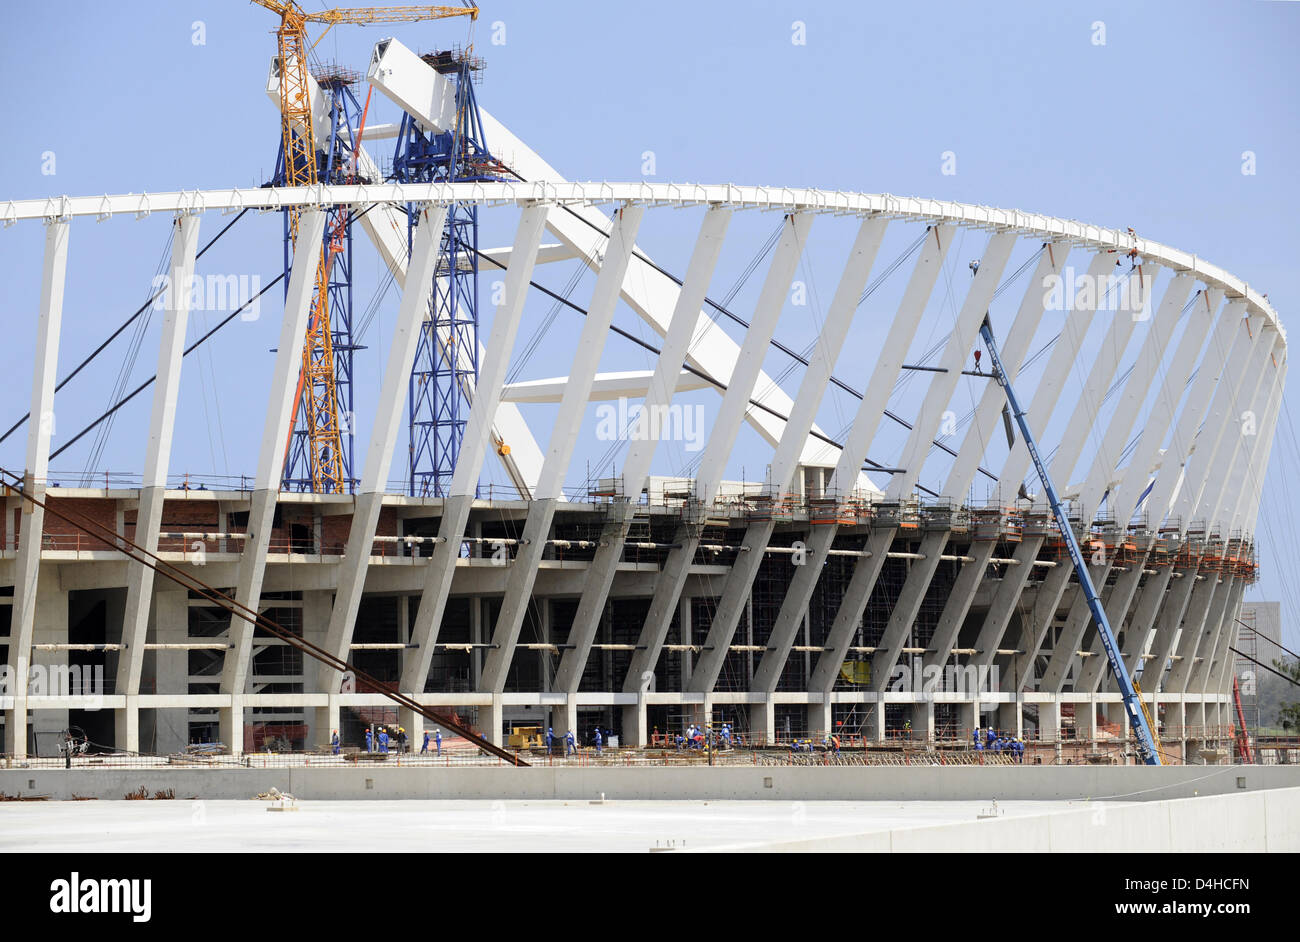 The construction site of Moses Mabhida Stadium in Durban, South Africa, 21 November 2008. South Africa hosts the soccer World Cup 2010. Photo: FRANK MAY Stock Photo